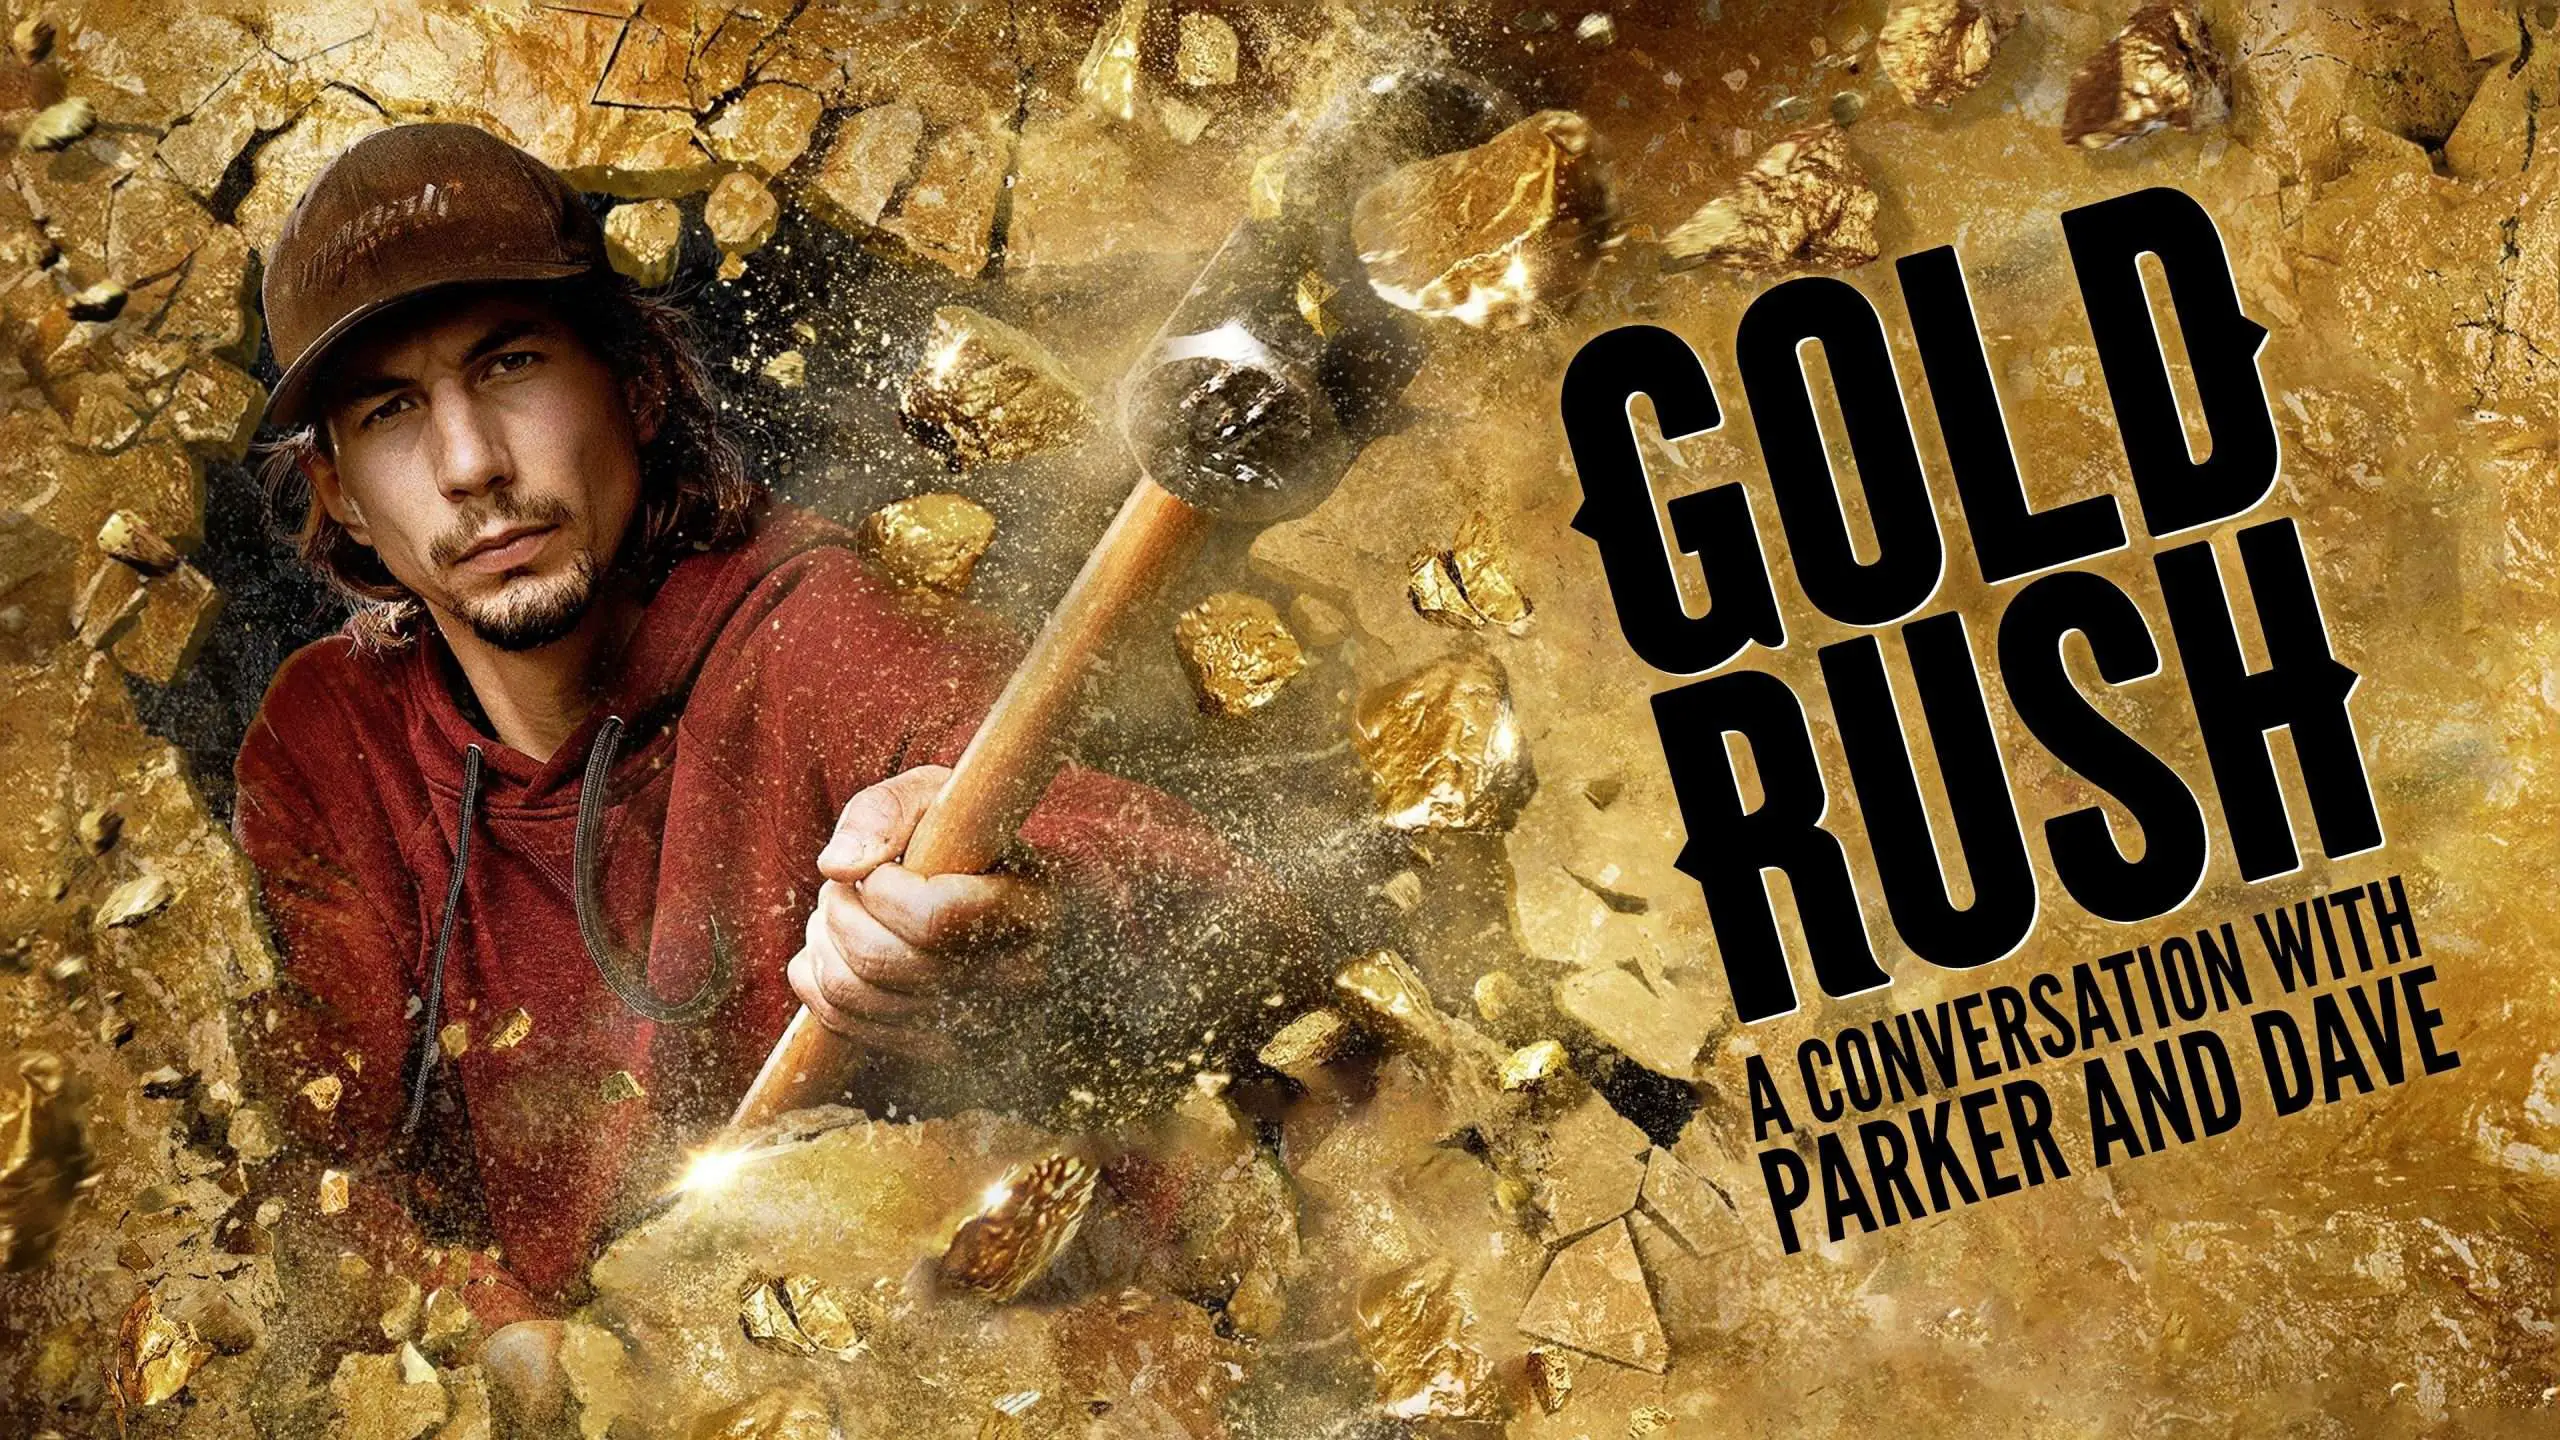 Watch Gold Rush: A Conversation With Parker and Dave